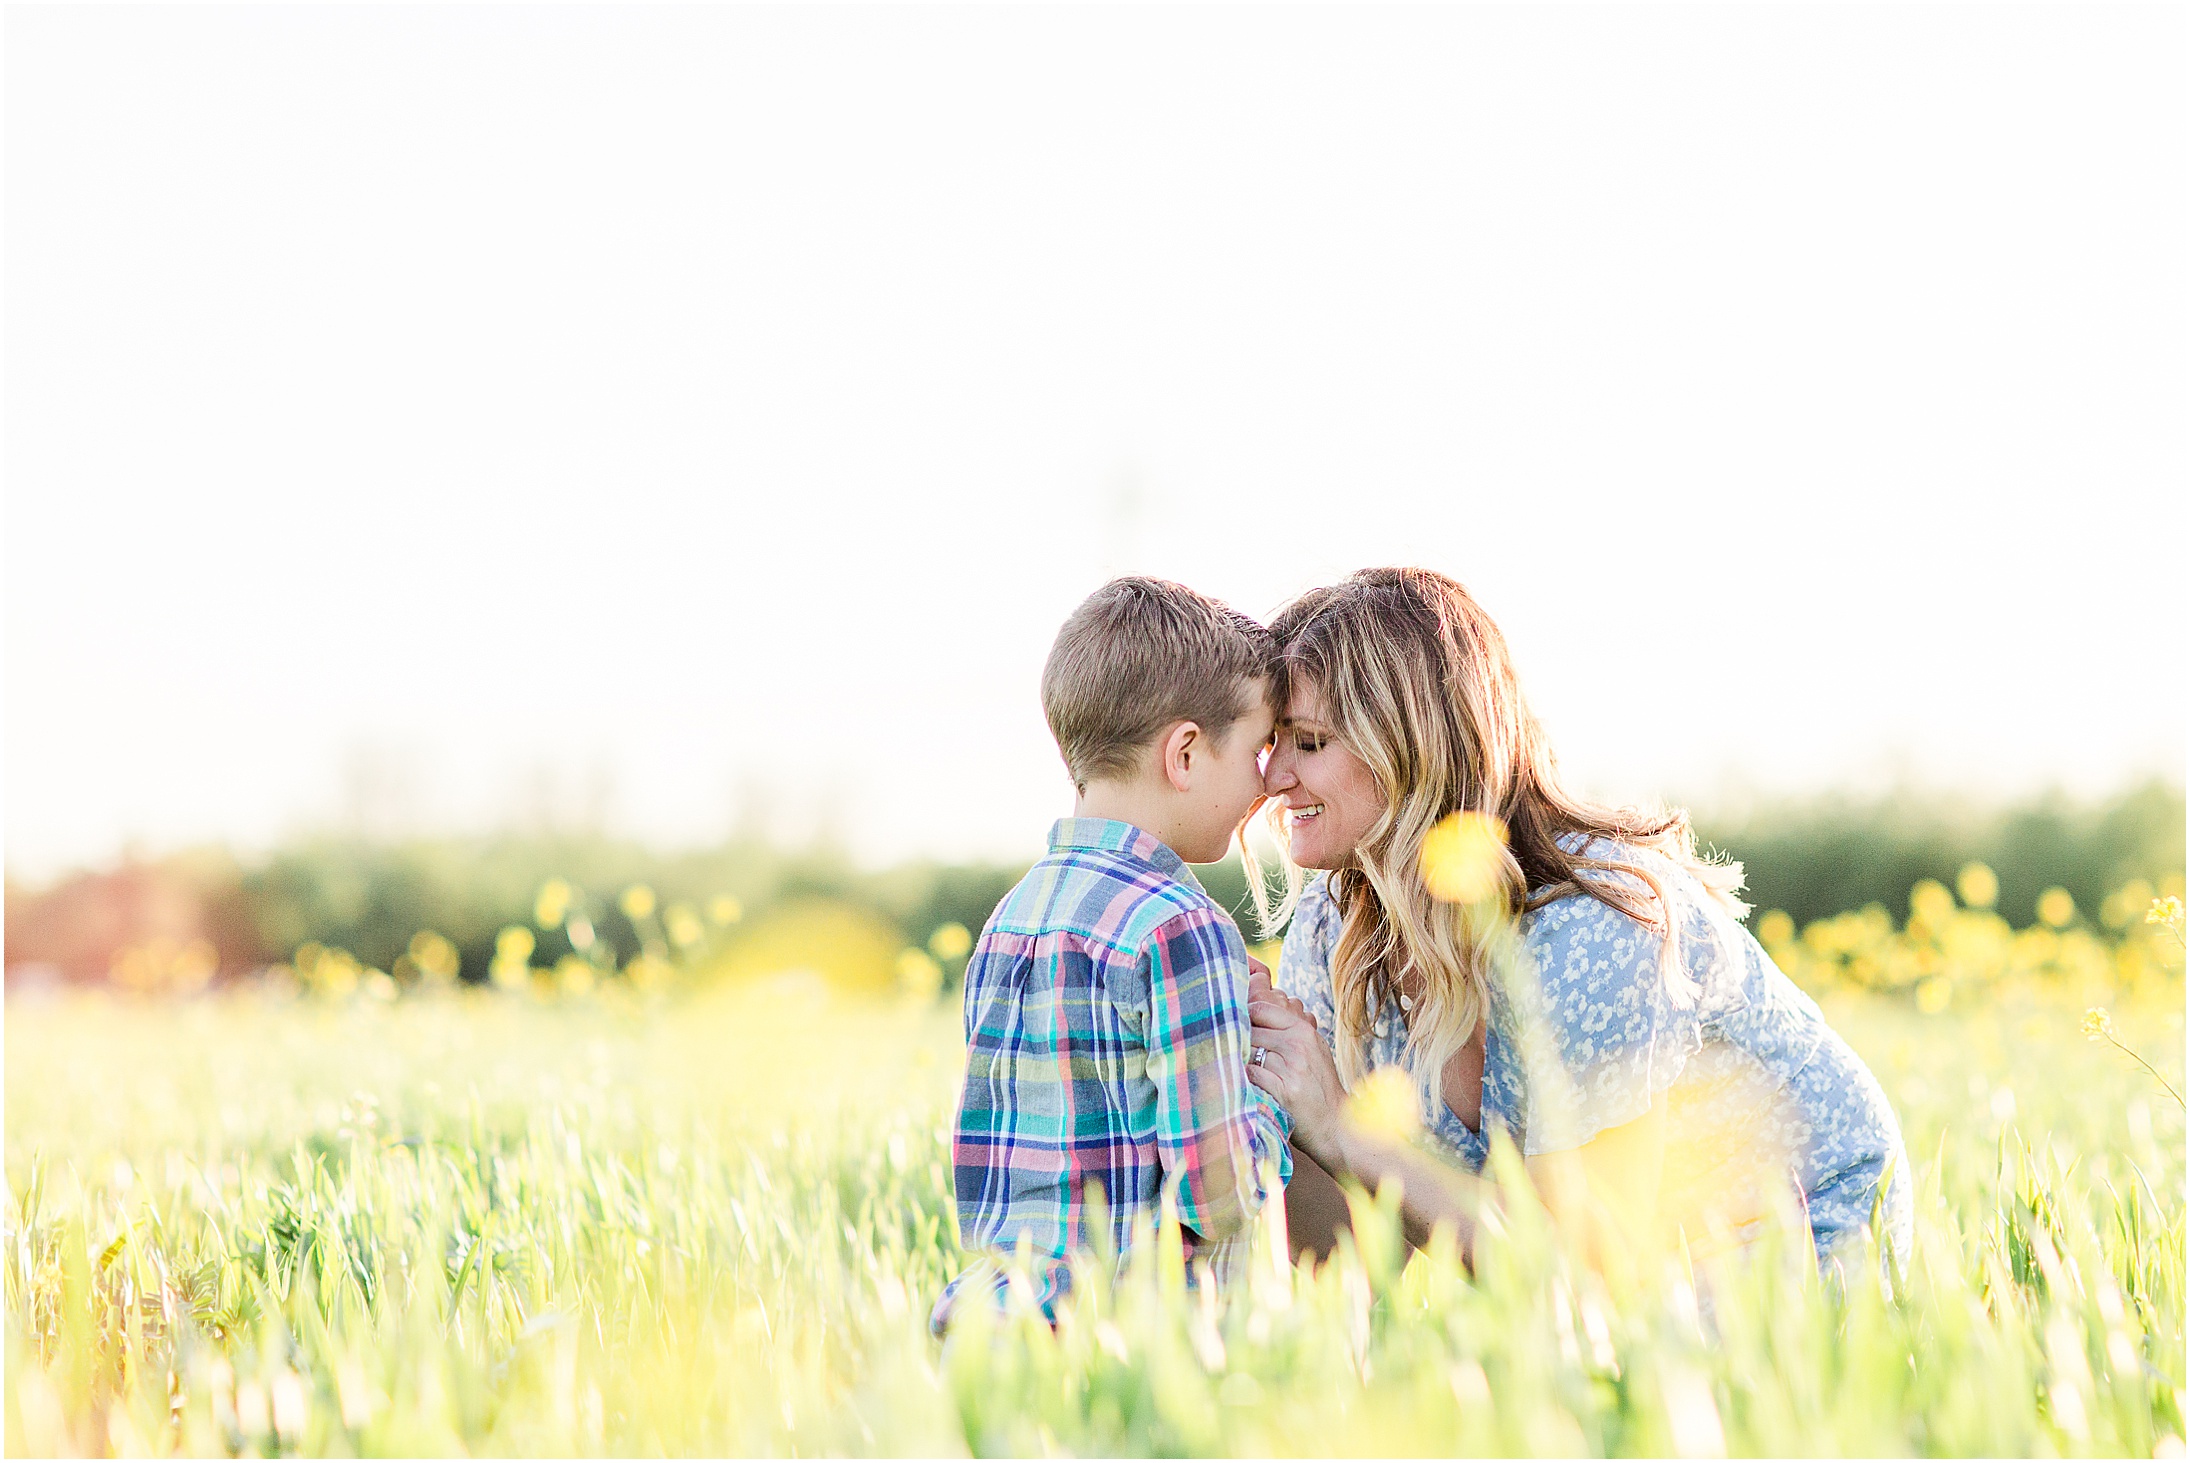 Wheat Field Flowers Chico California Family Session Mother Daughter Son,